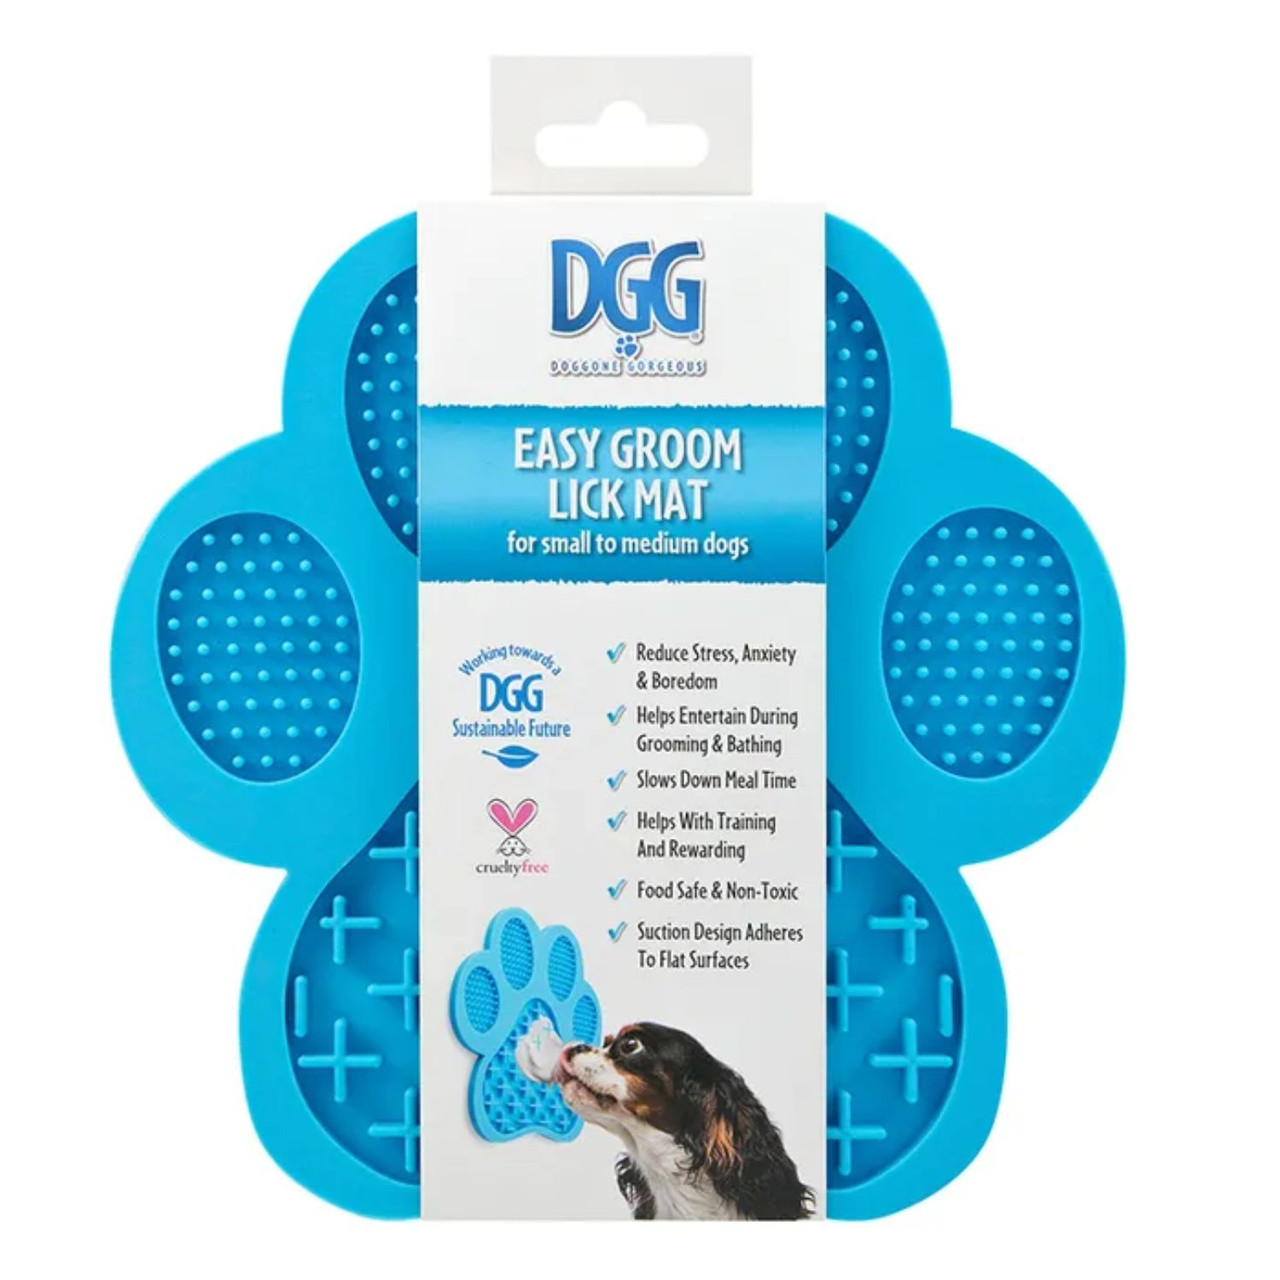 DGG Paw Shaped Easy Groom Lick Mat For Dogs